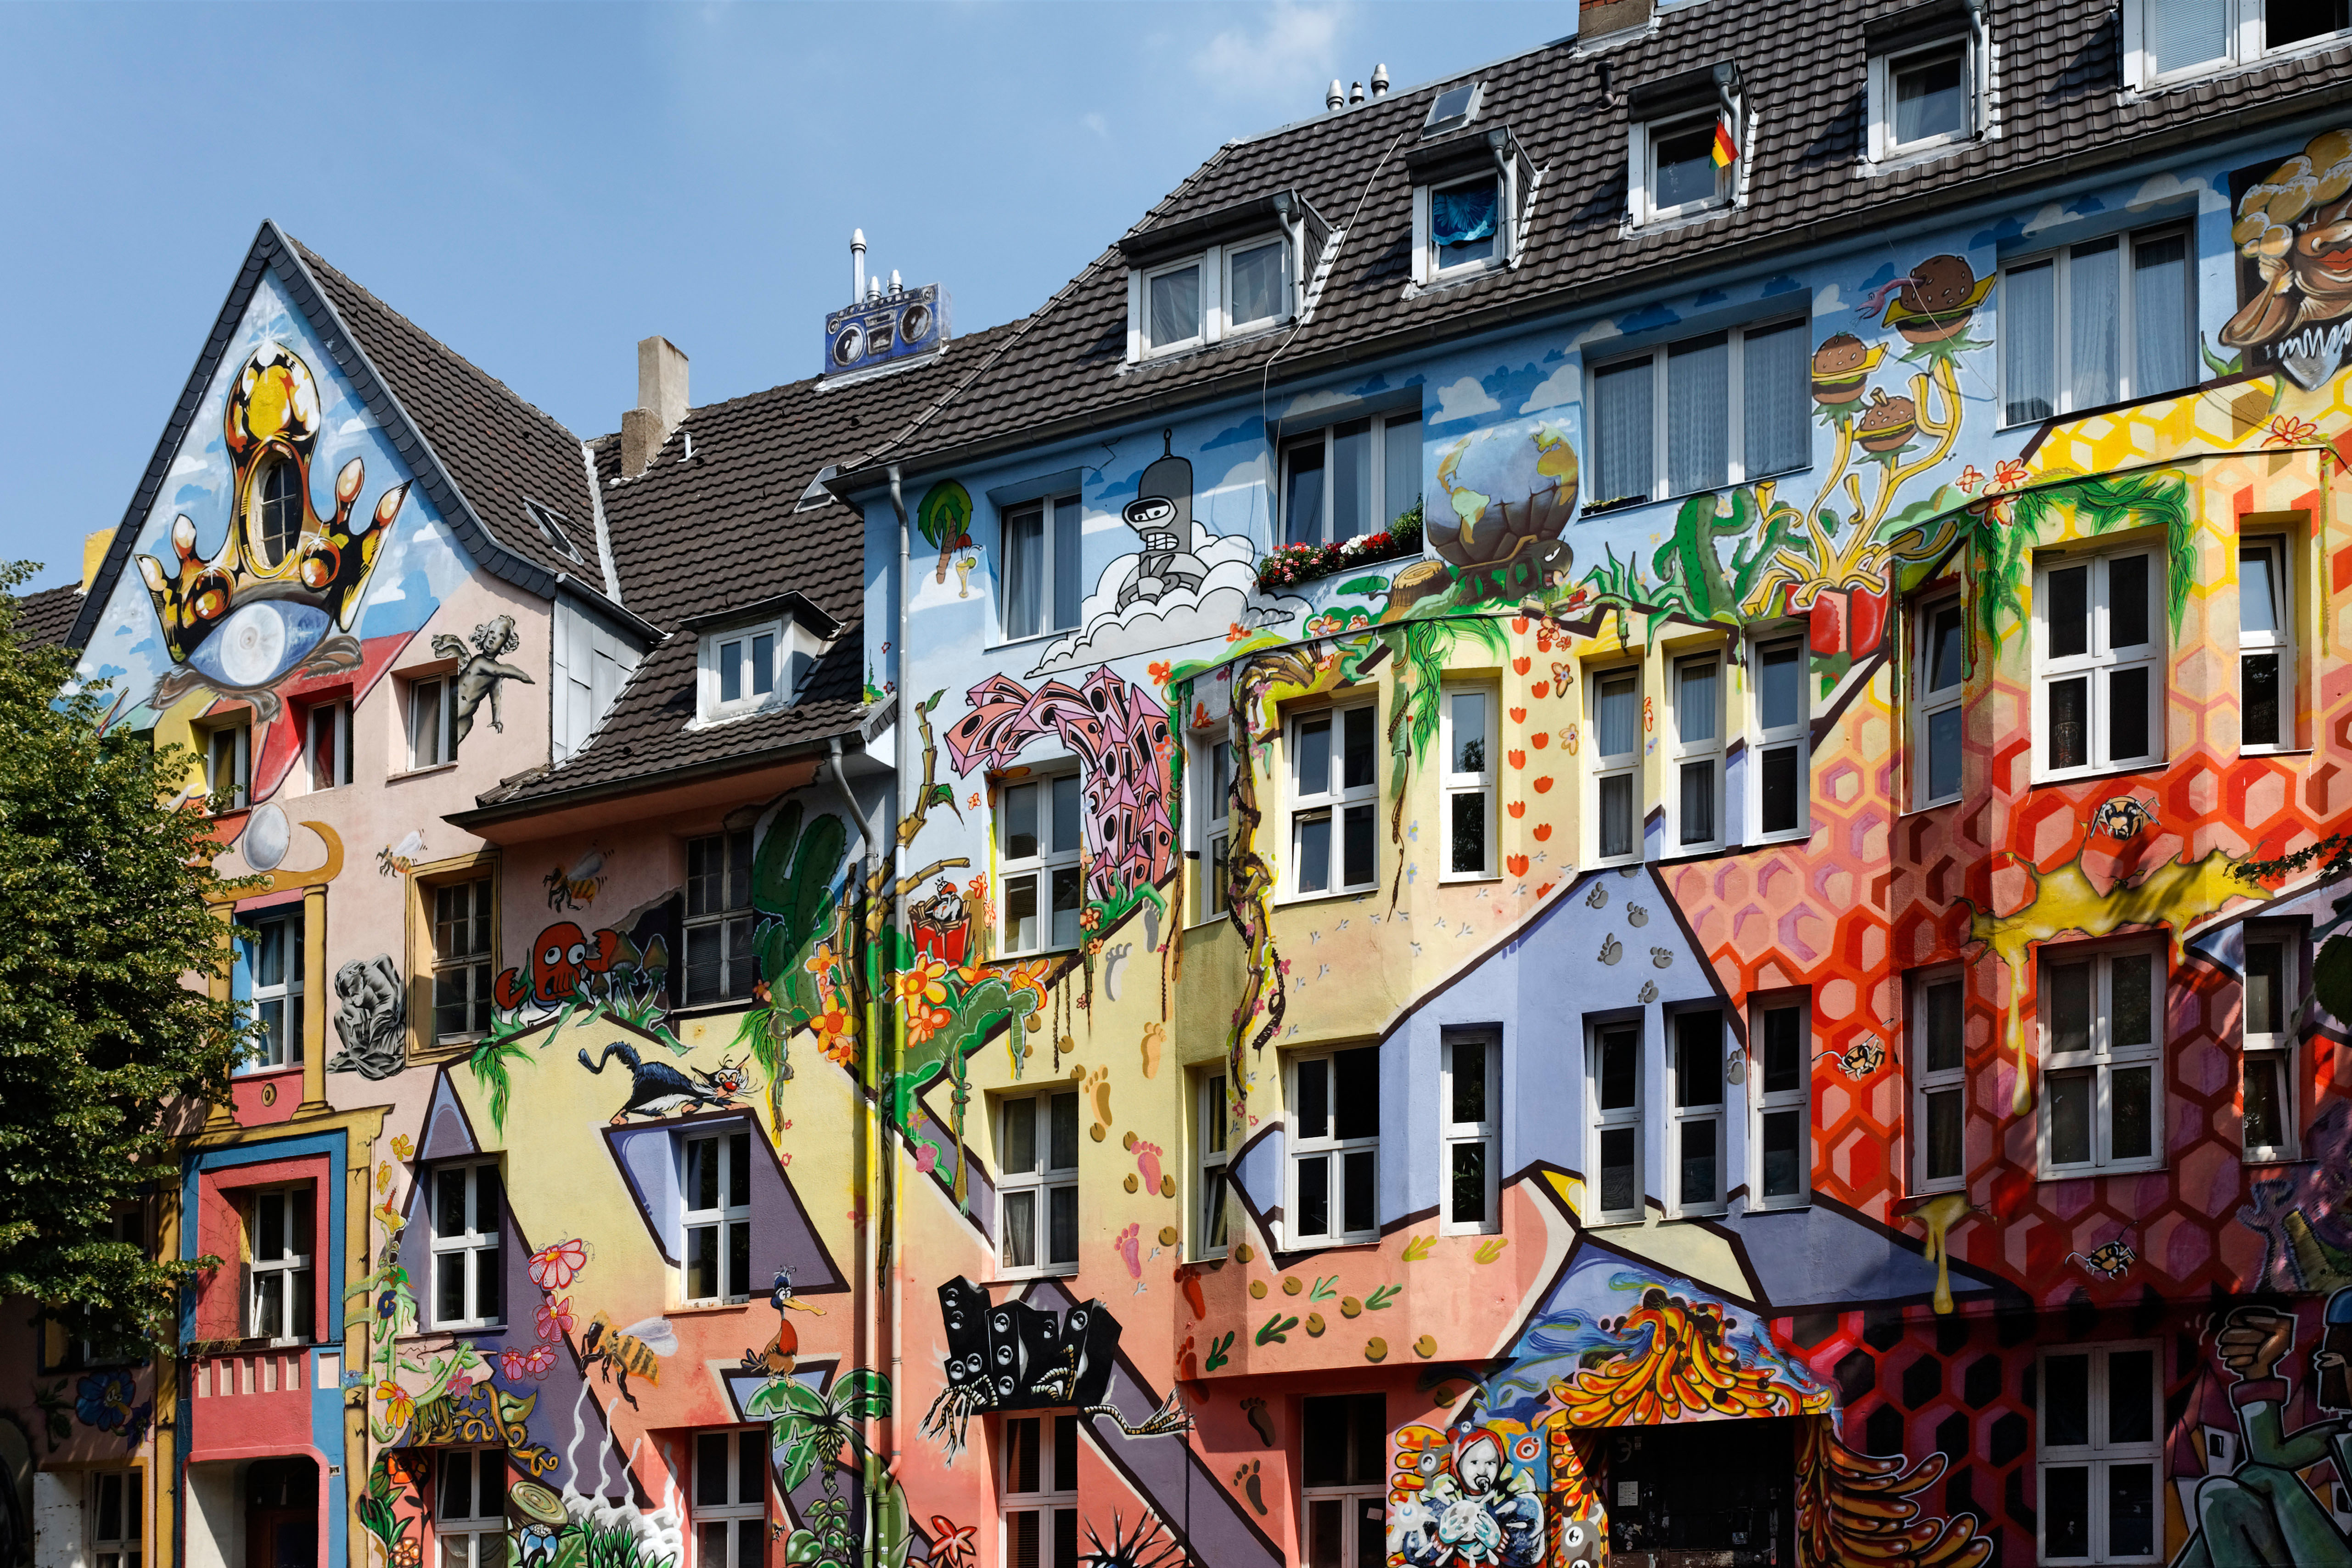 Kiefernstrasse street, houses of former squatters, artistically painted facades in street art style, Duesseldorf-Flingern